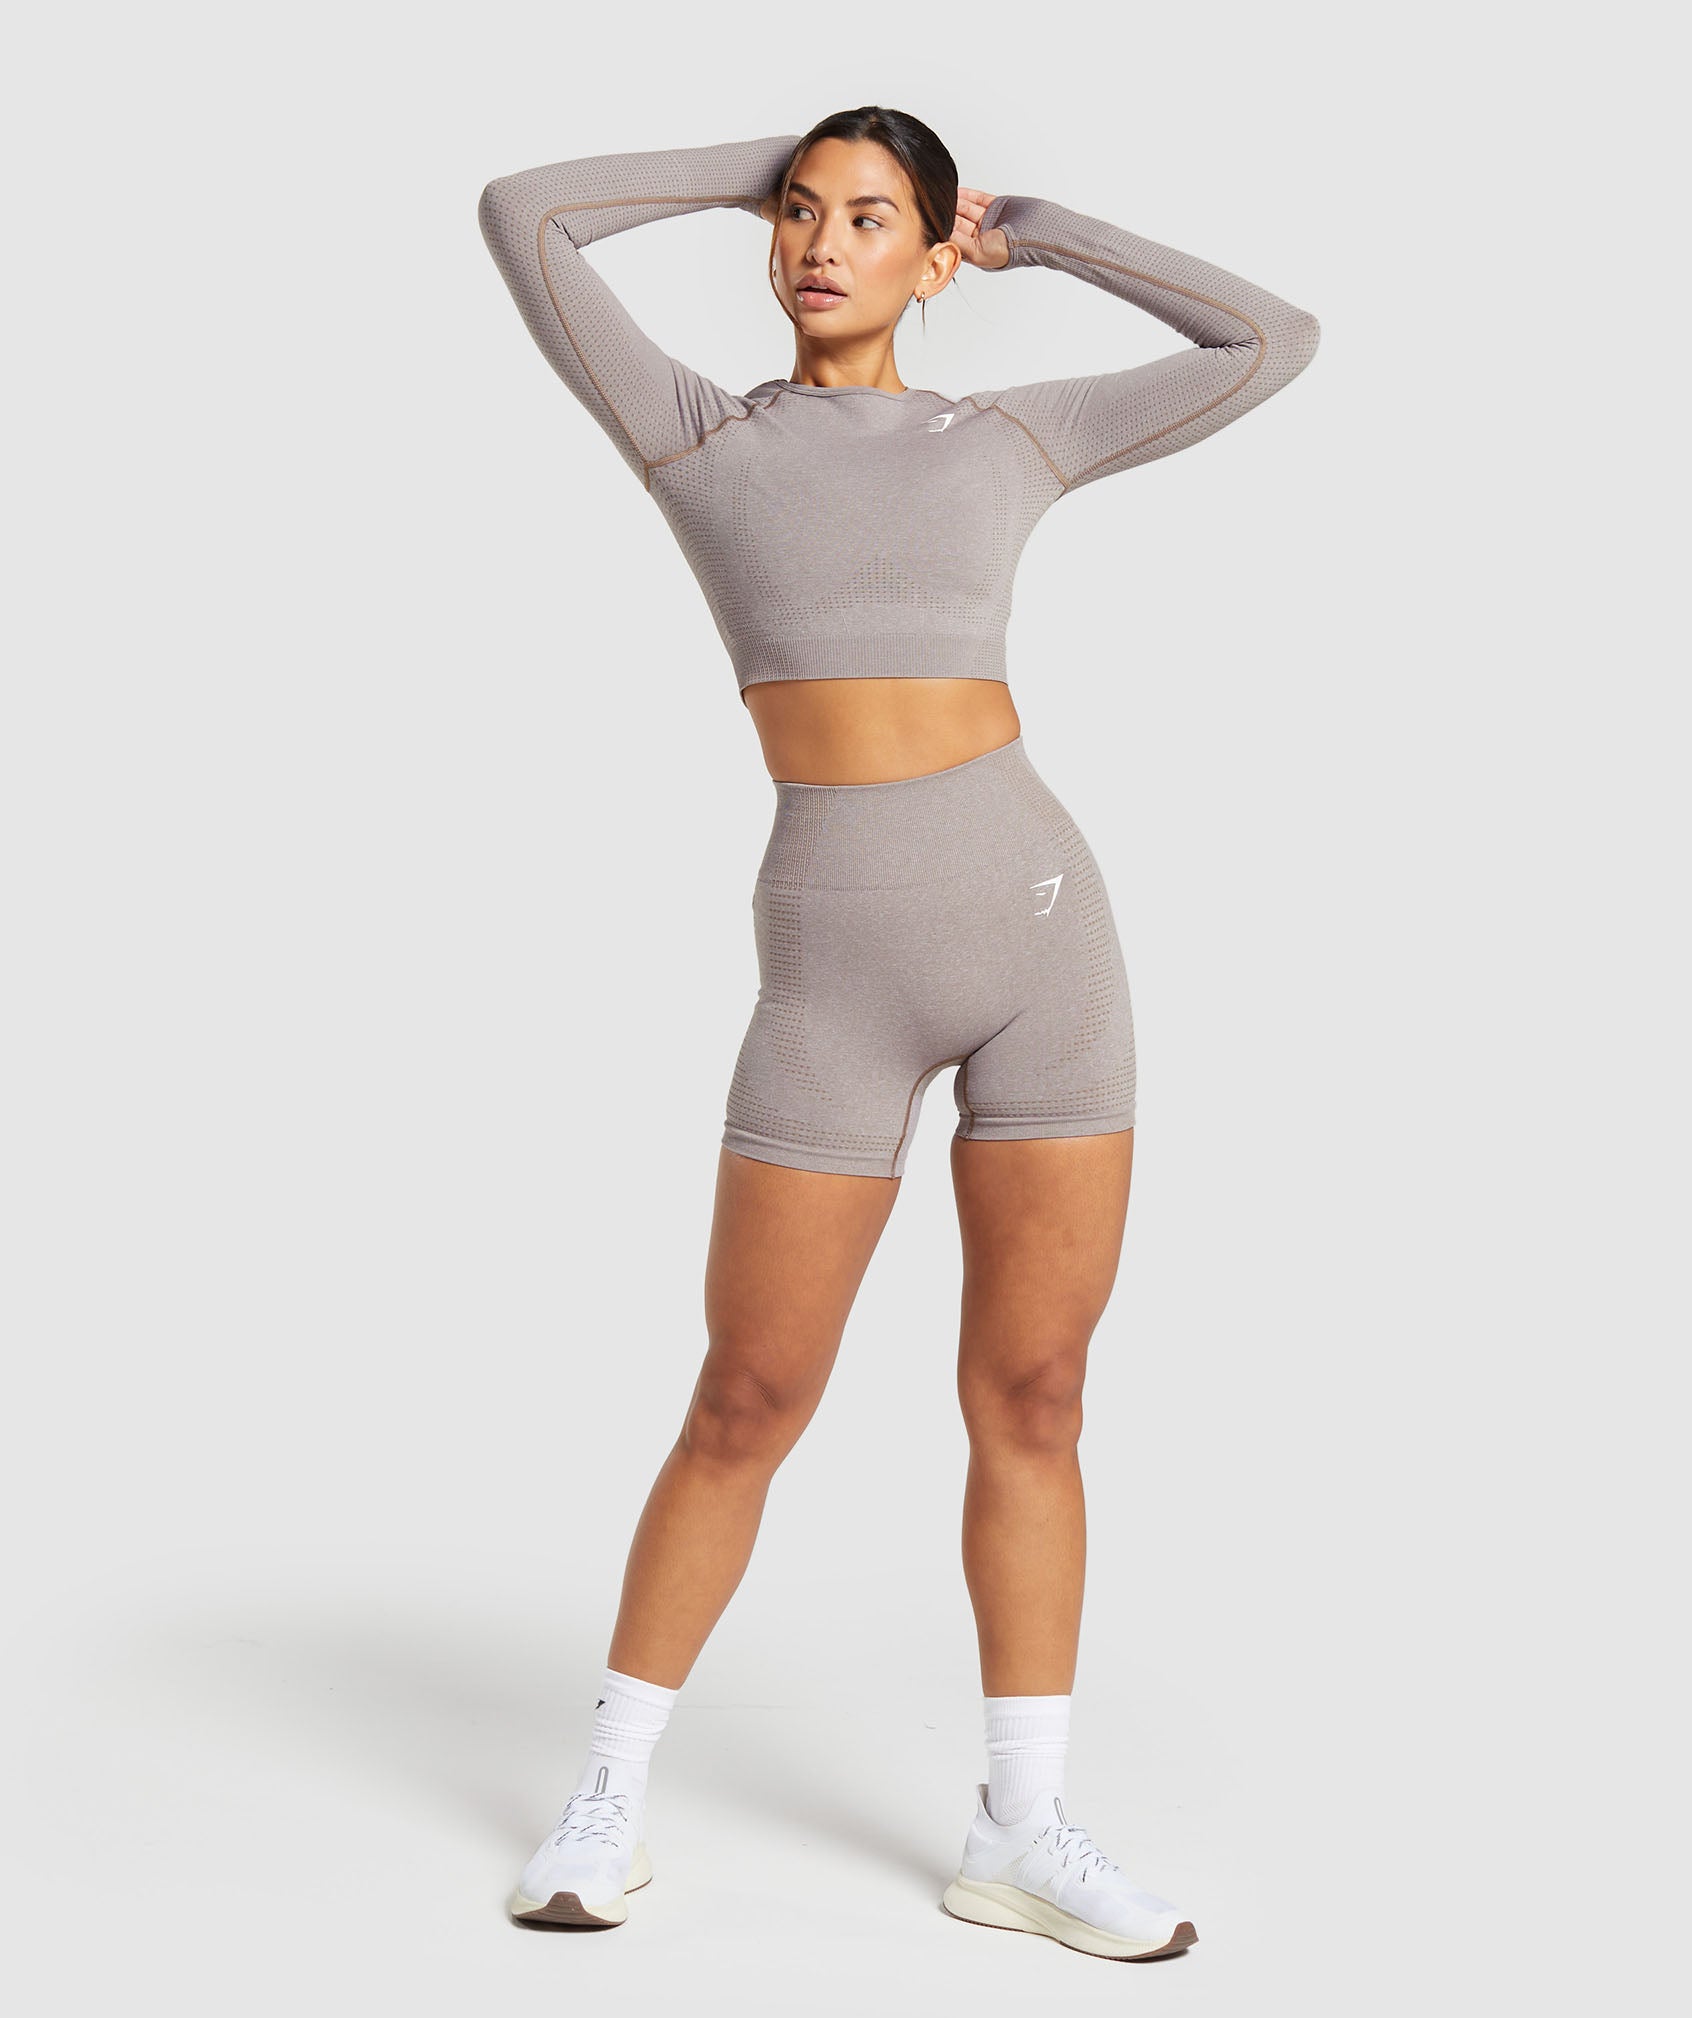 Vital Seamless 2.0 Shorts in Warm Taupe Marl - view 4